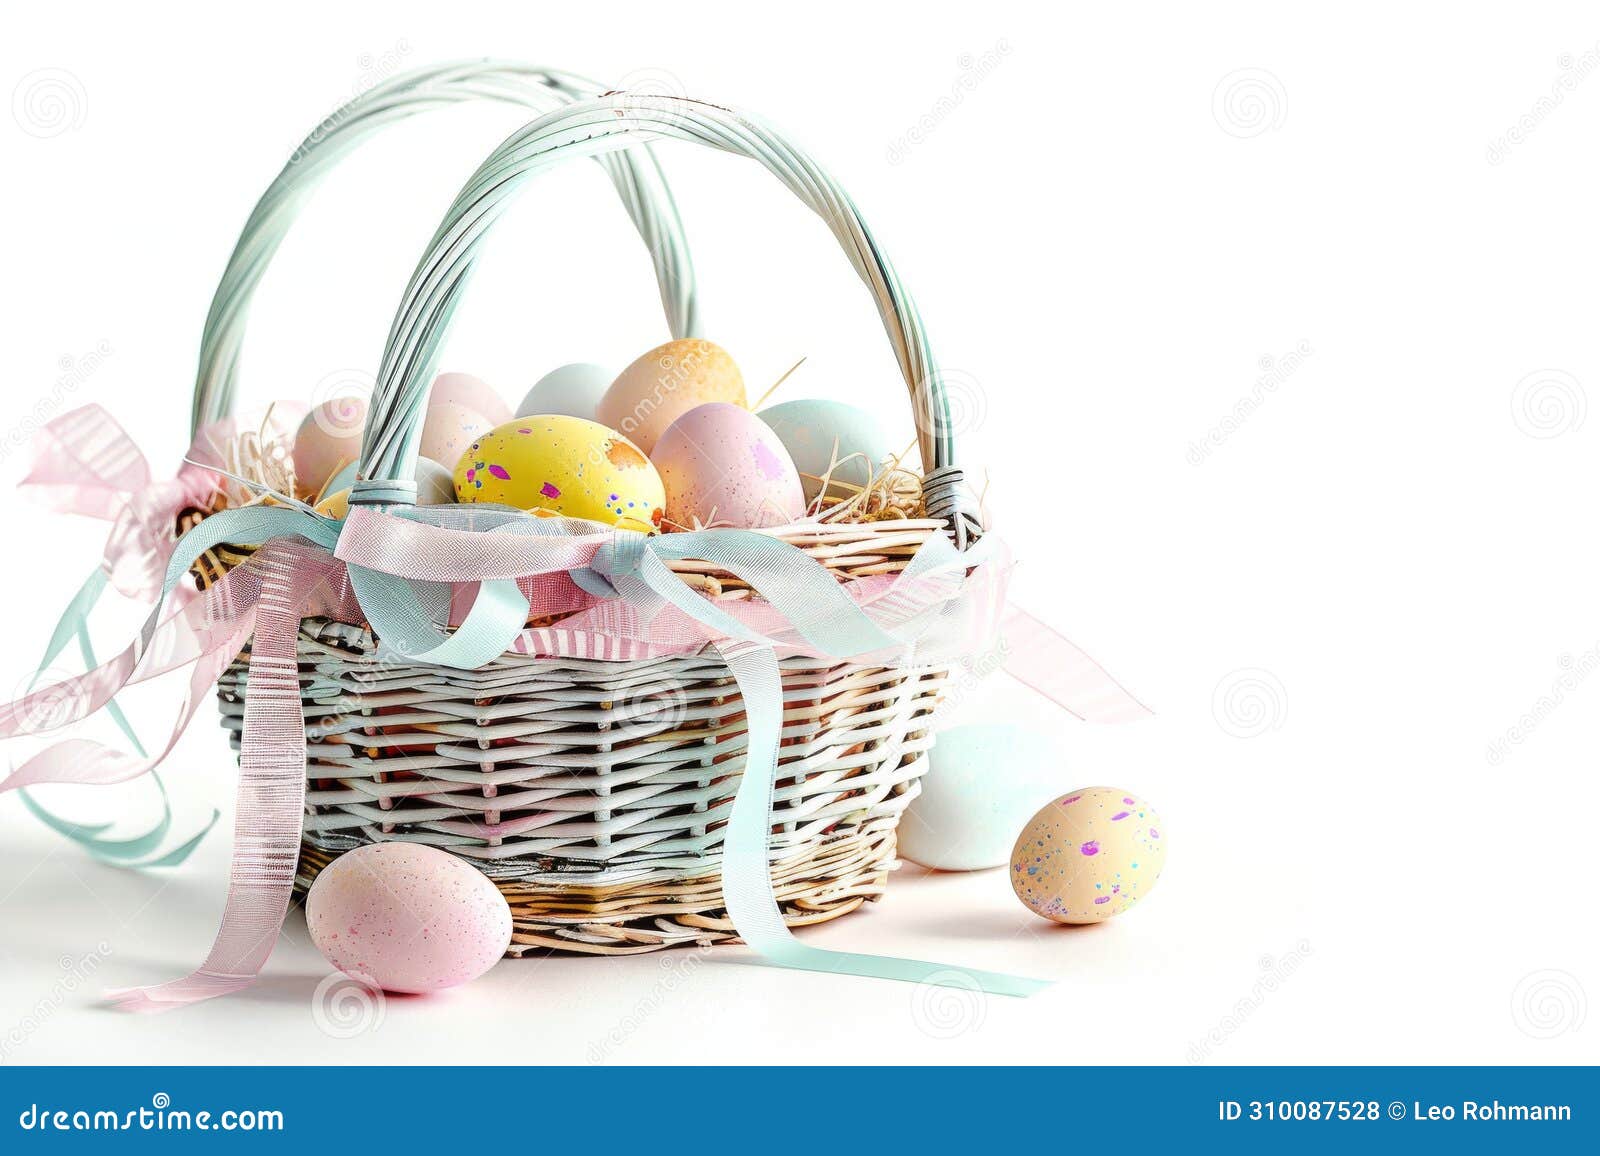 happy easter hop composting eggs guarded easter eggs basket. white trickster bunny red bougainvillea. representation background